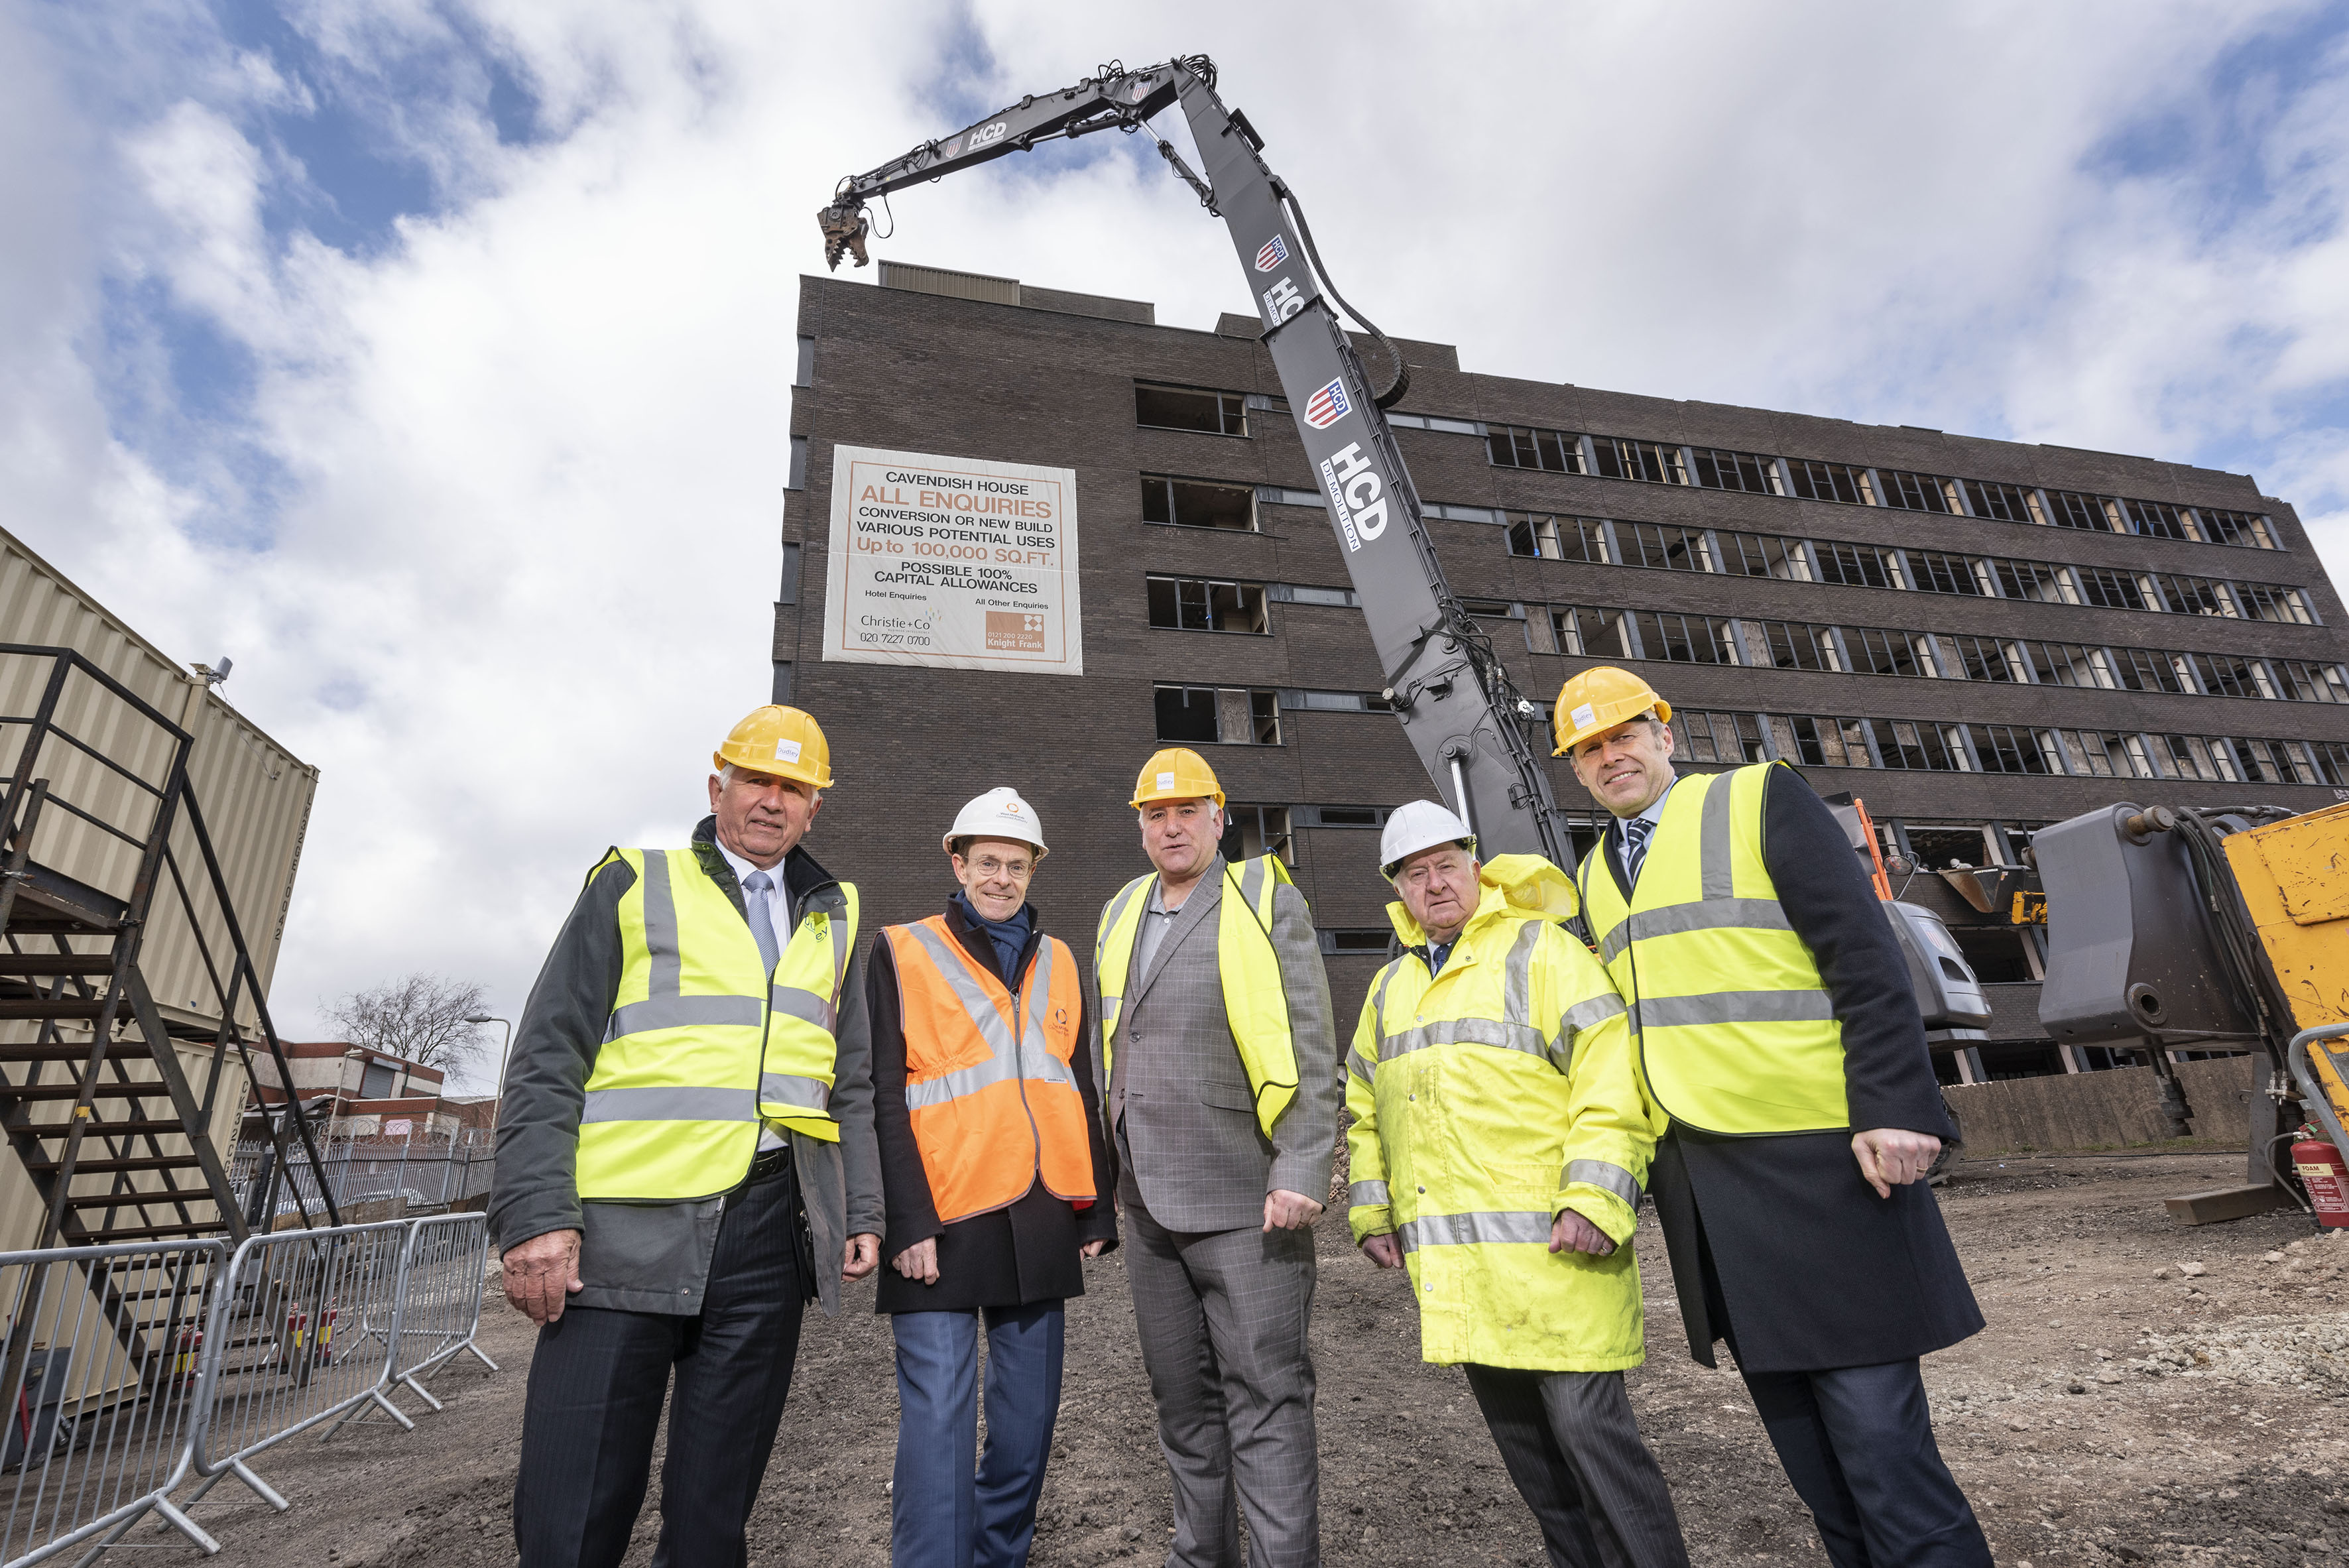 From left: Jeremy Knight-Adams, owner of developer Avery Dudley, Mayor of the West Midlands Andy Street, Cllr Pat Harley, Cllr Mike Bird and Jon Bramwell